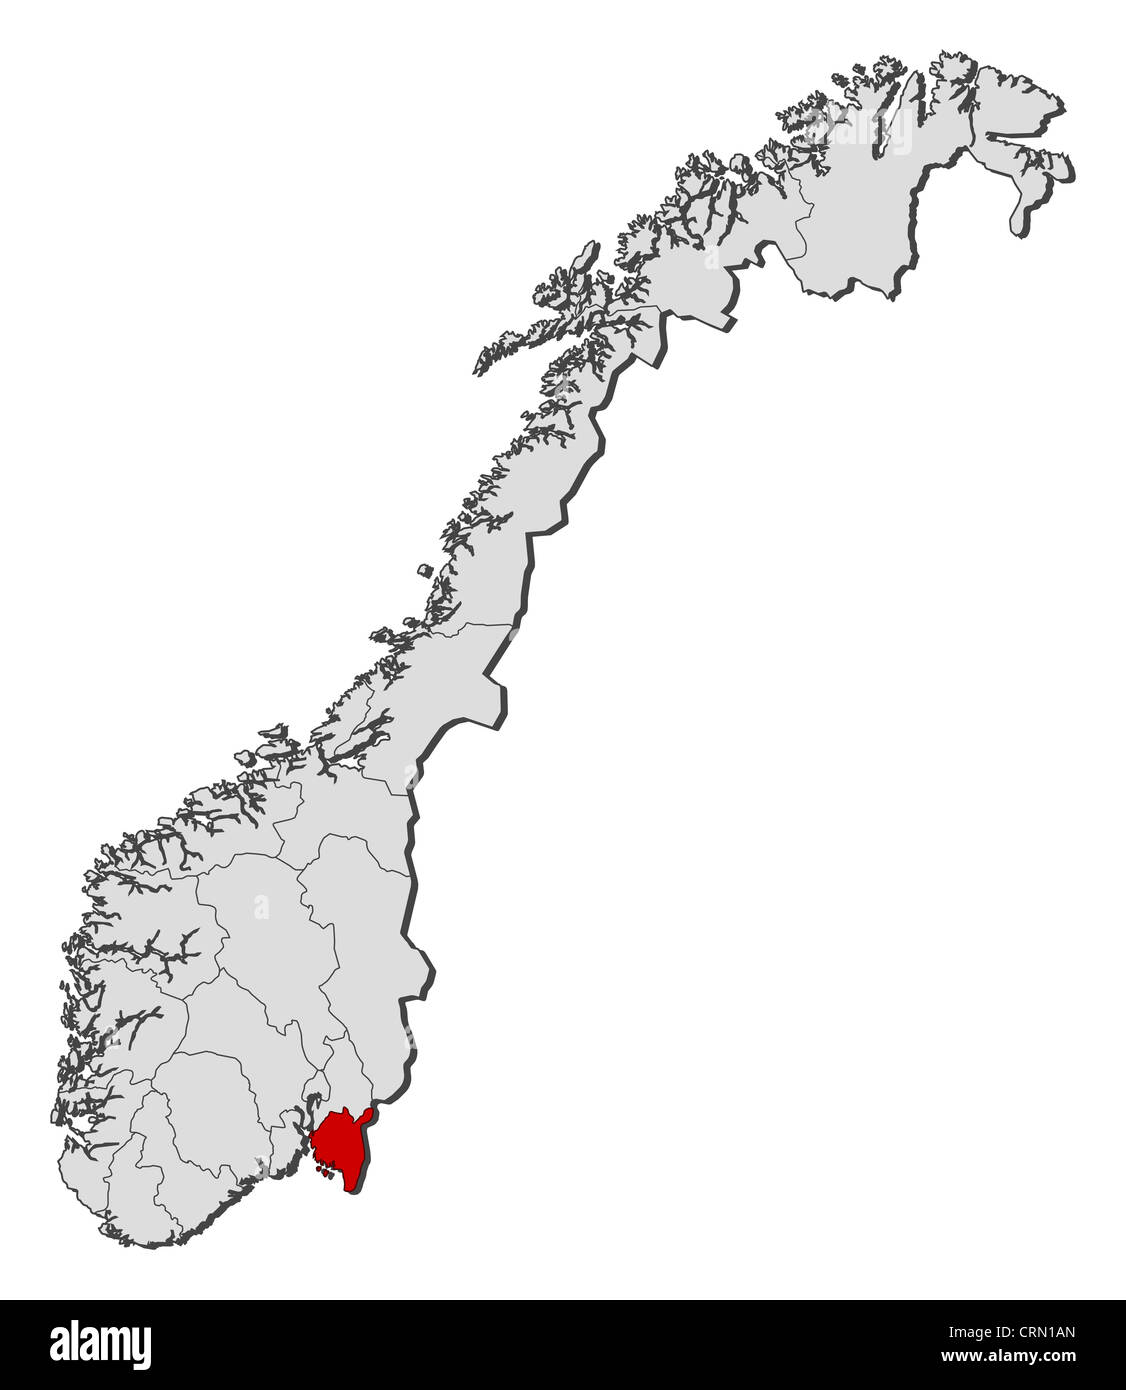 Political map of Norway with the several counties where Østfold is highlighted. Stock Photo